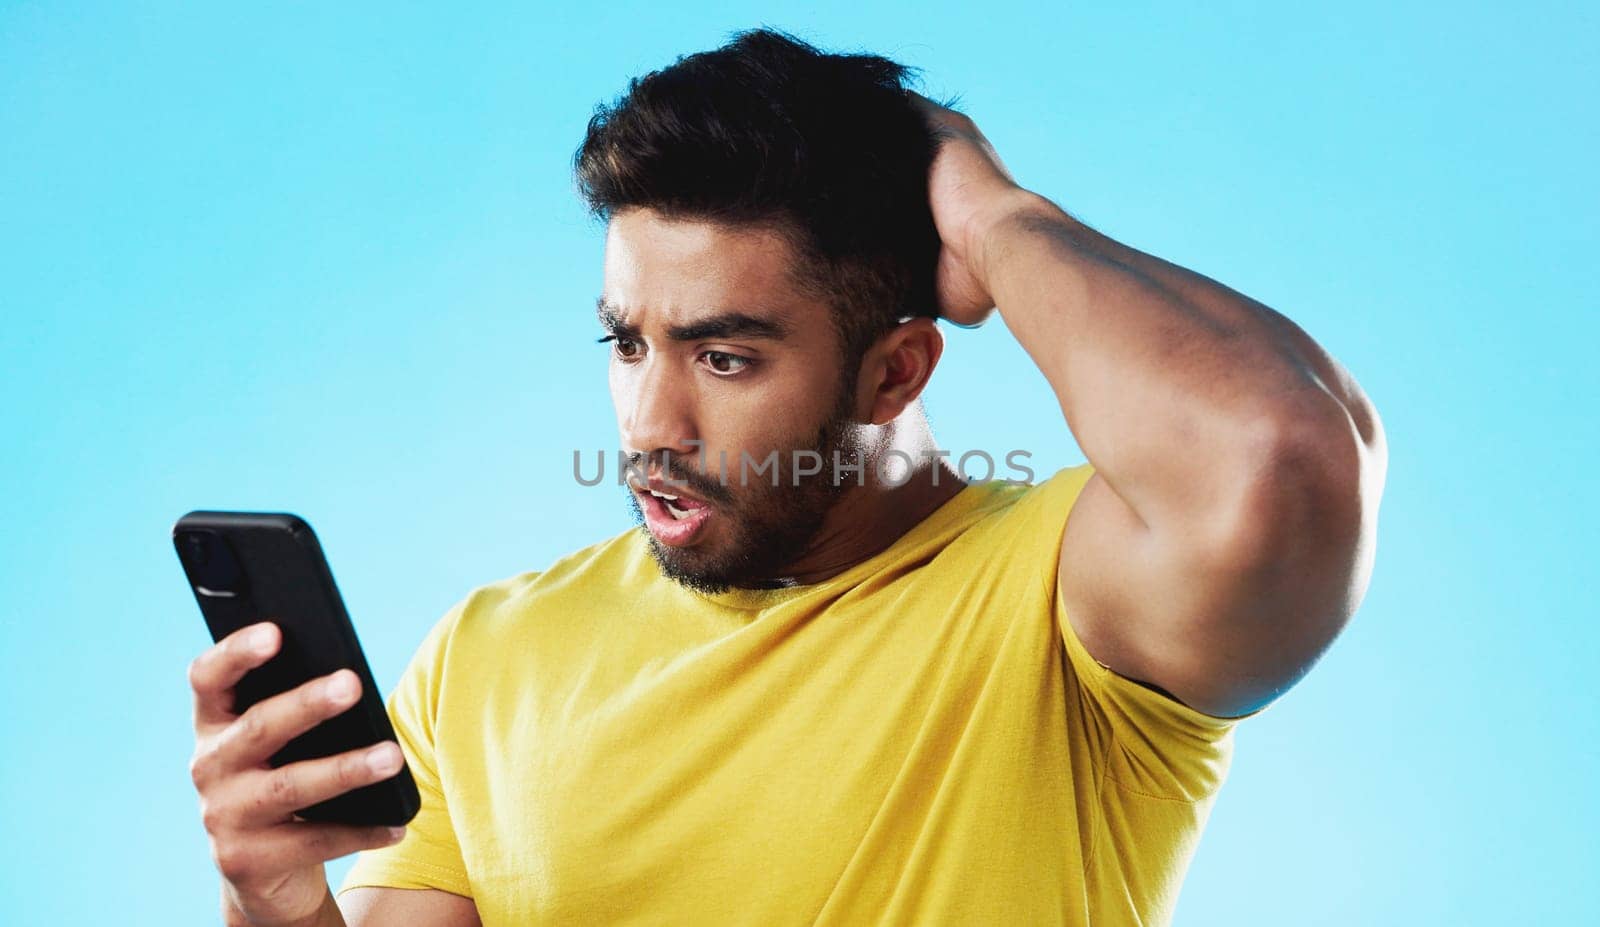 Phone, wow or bad news with a man reading a negative text message in studio on a blue background. Mobile, contact and surprise with a young male looking shocked by a social media post or announcement.